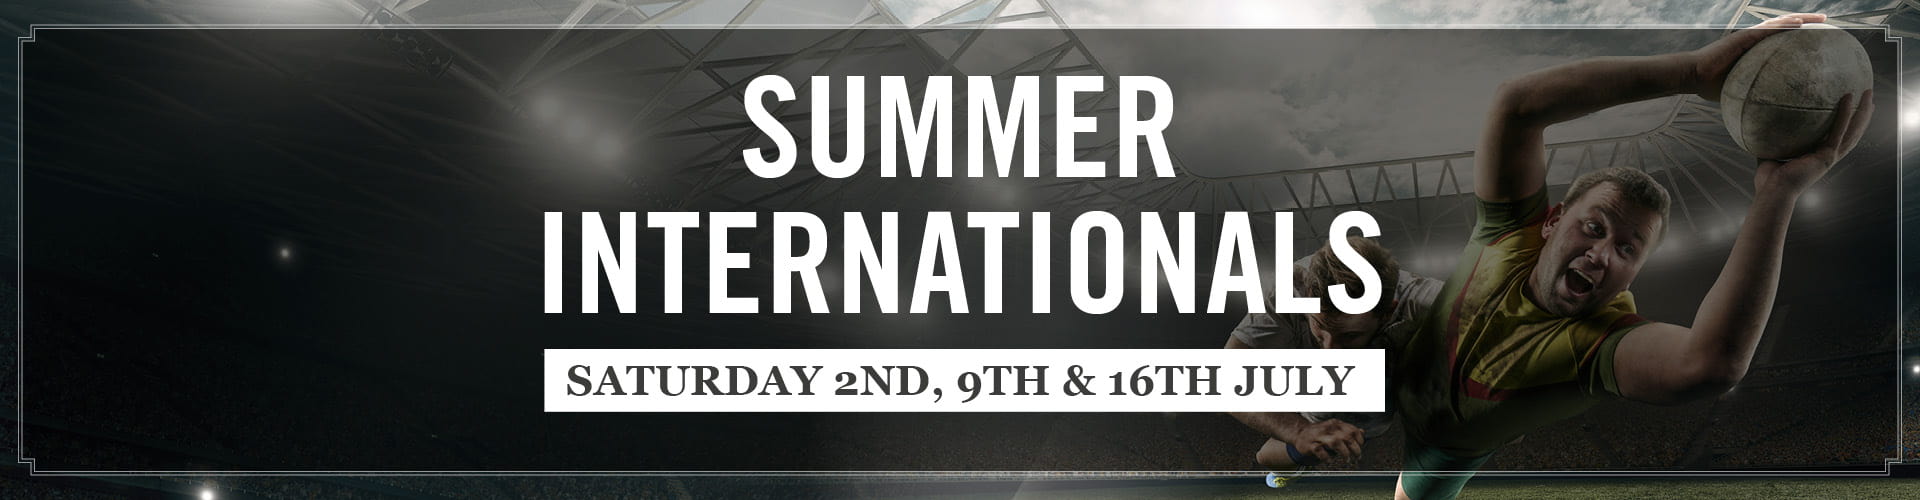 Watch Rugby Summer Internationals live at Three Tuns pub in London